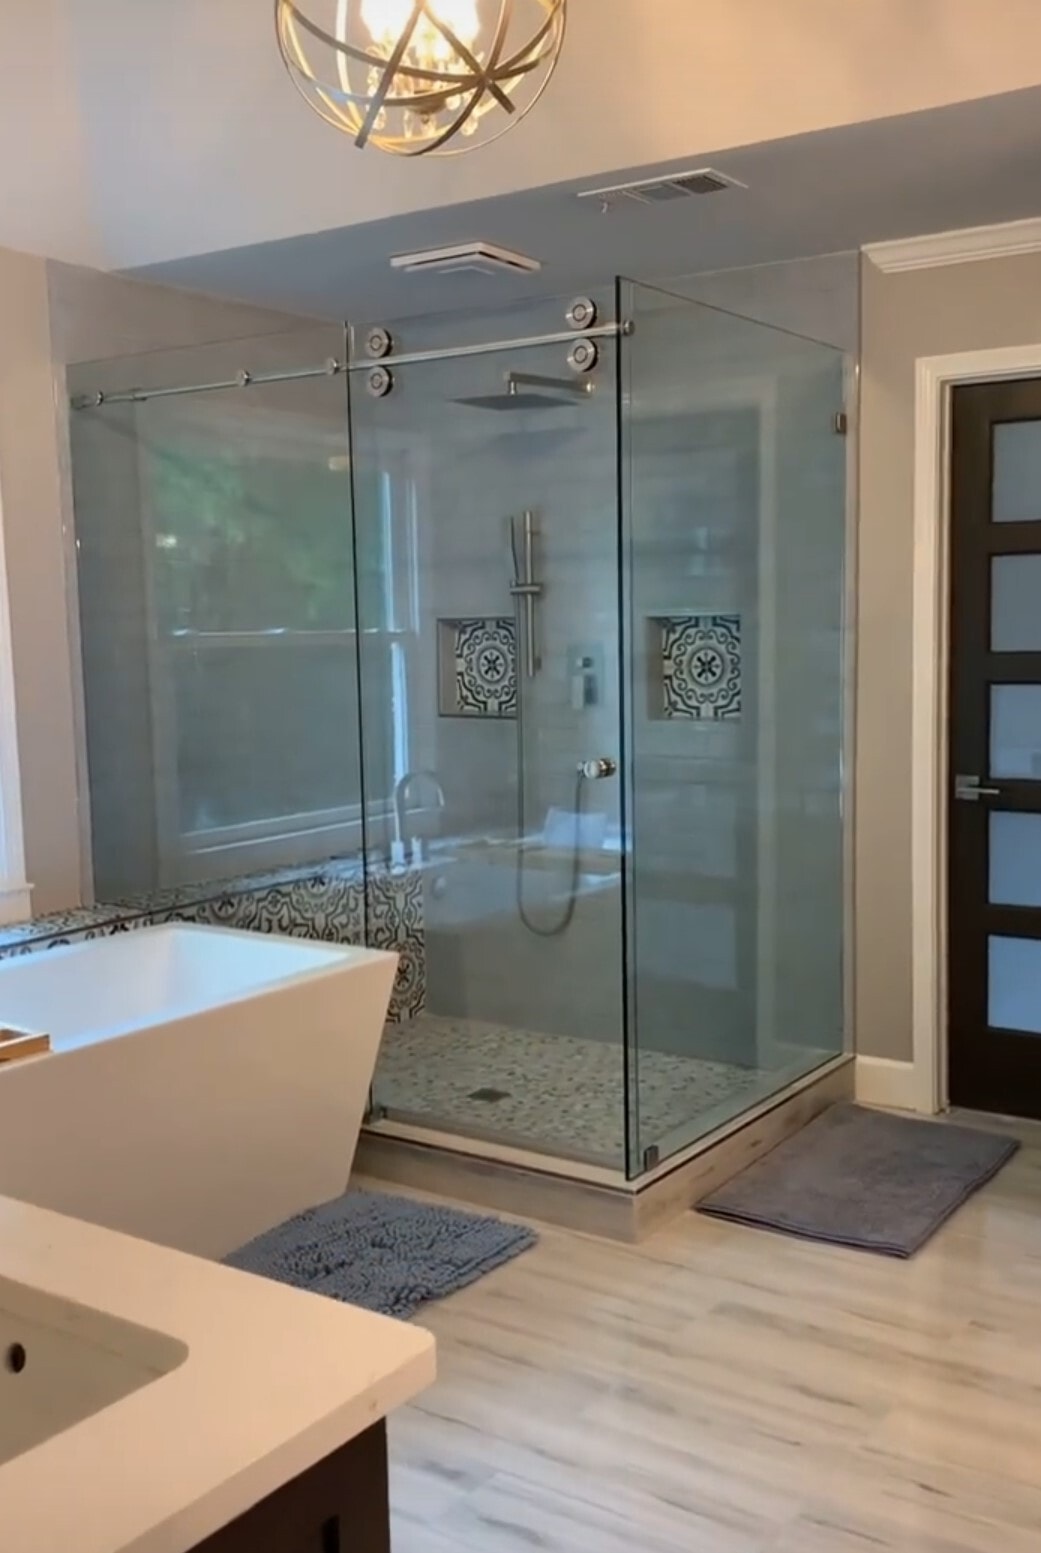 Stunning Crescent series sliding shower door with a return panel and a Euro style knob.